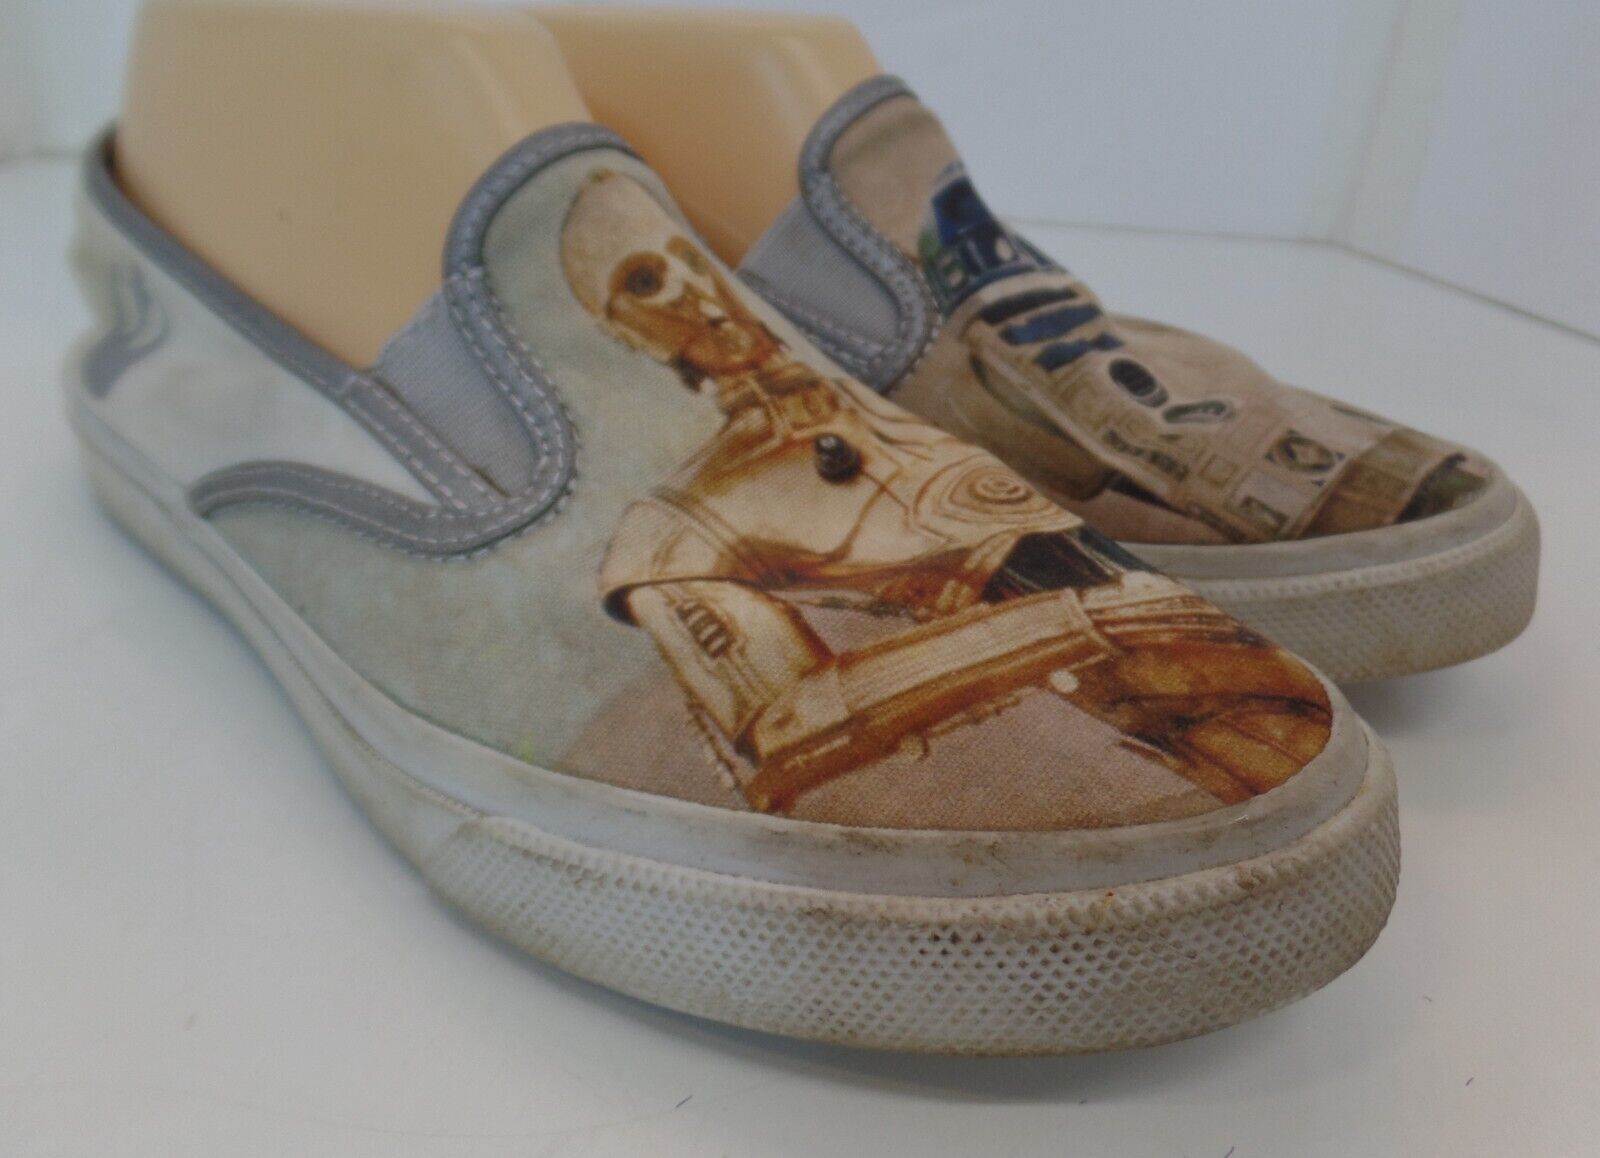 Primary image for Star Wars X Sperry Top Sider Slip On Comfort Shoes Men's R2D2 C3PO Size 6.5